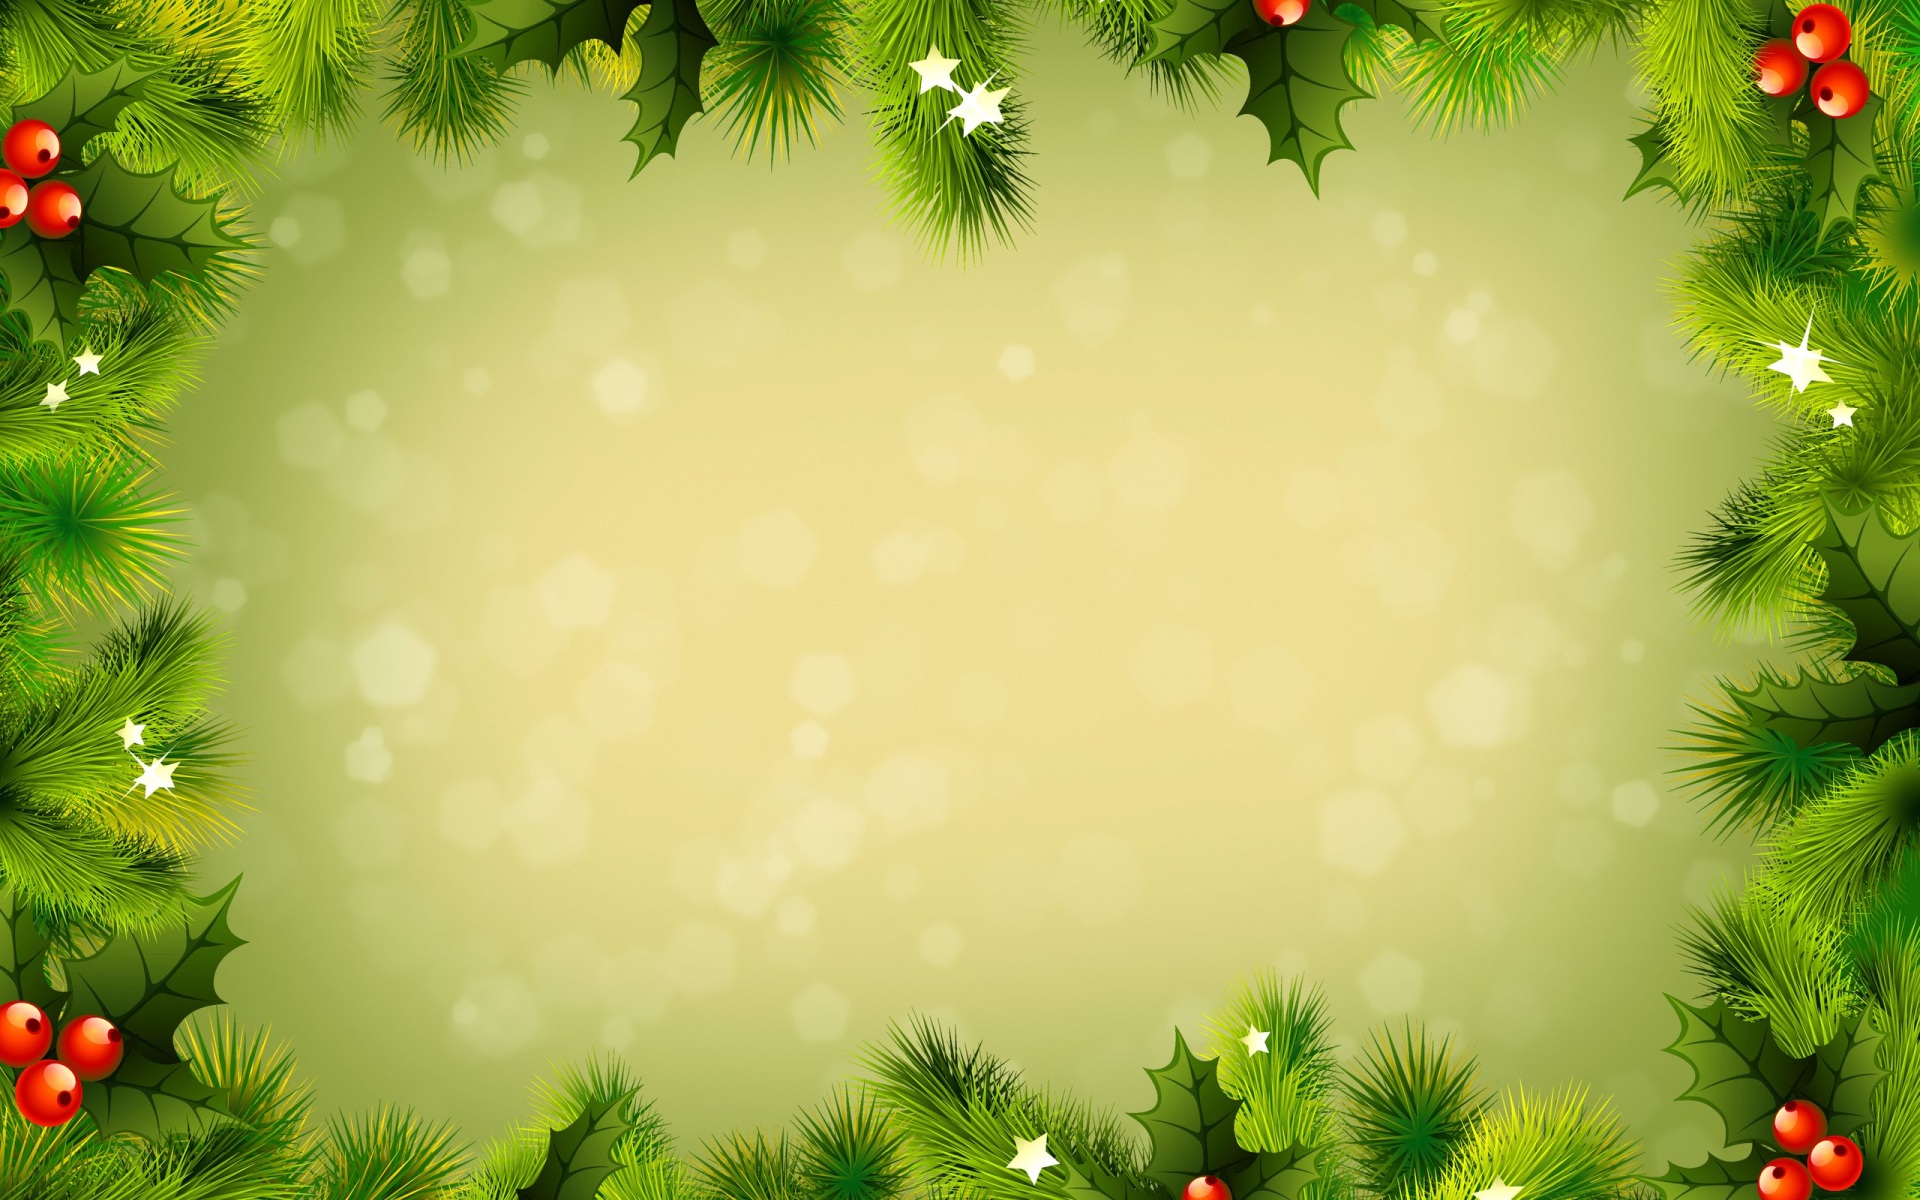 Christmas Background Images | Free Christmas Wallpapers